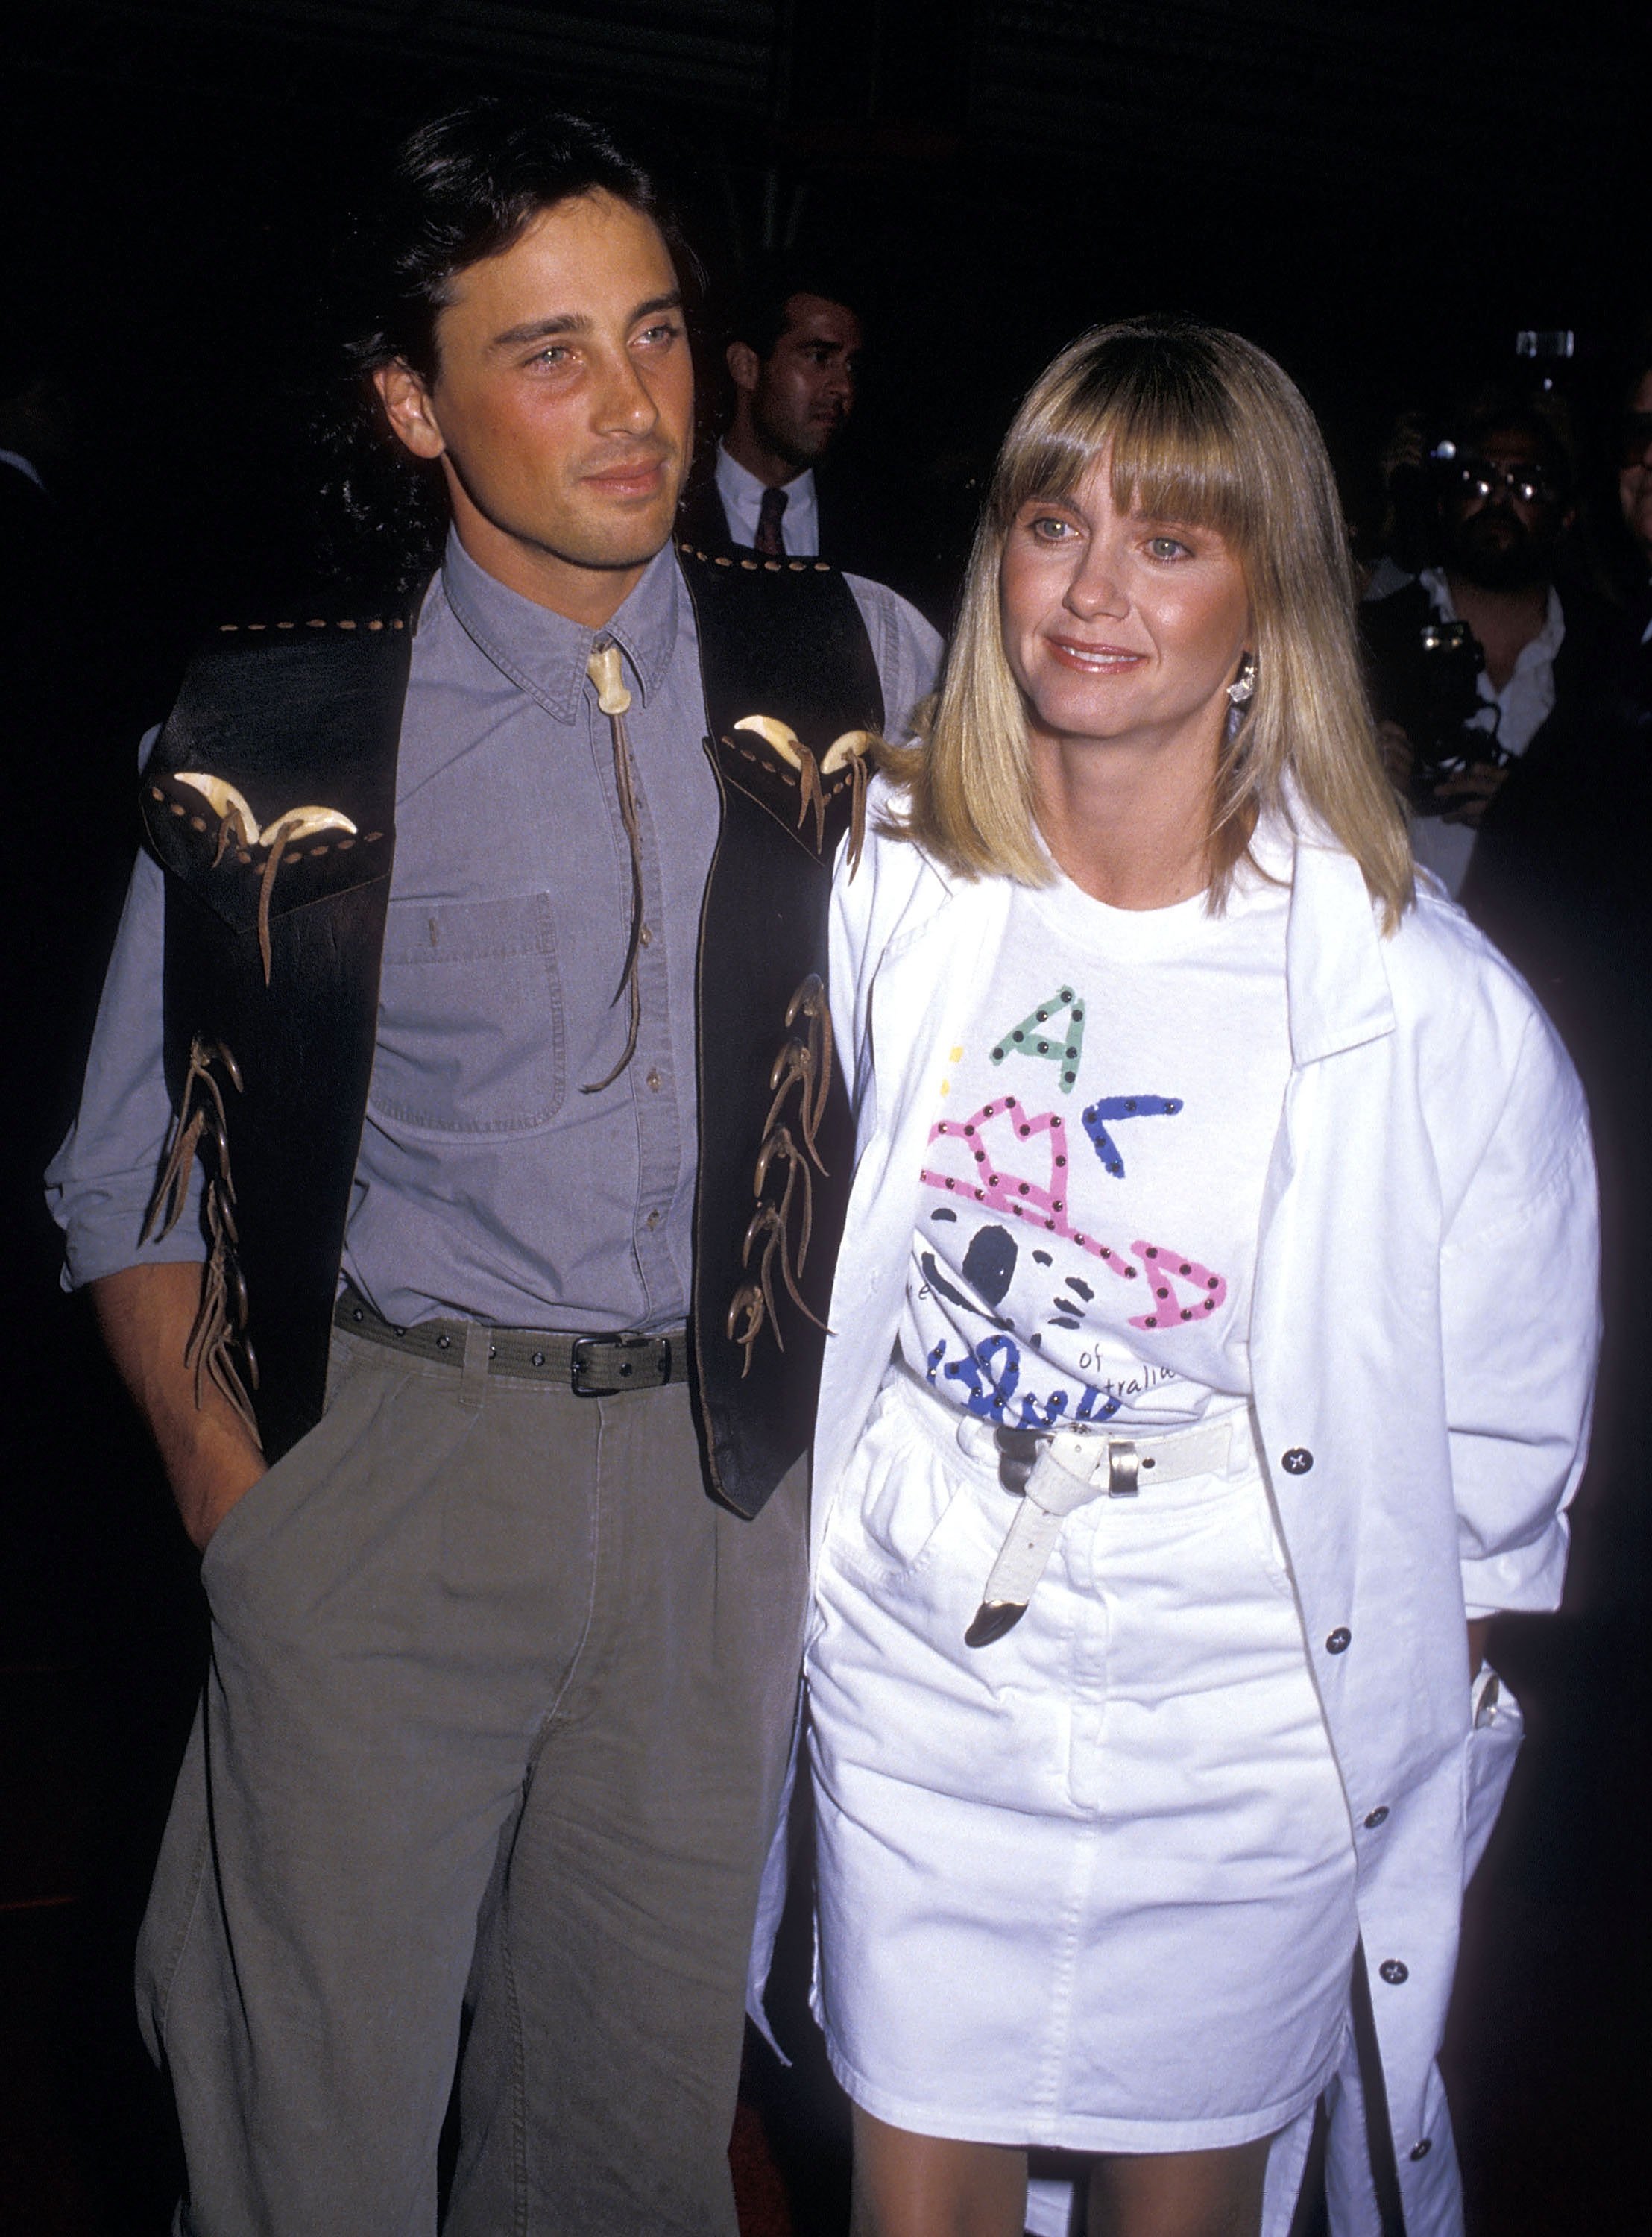 Singer Olivia Newton-John and husband Matt Lattanzi attend the "Crocodile Dundee II" Hollywood Premiere on May 22, 1988 at Mann's Chinese Theatre in Hollywood, California | Source: Getty Images